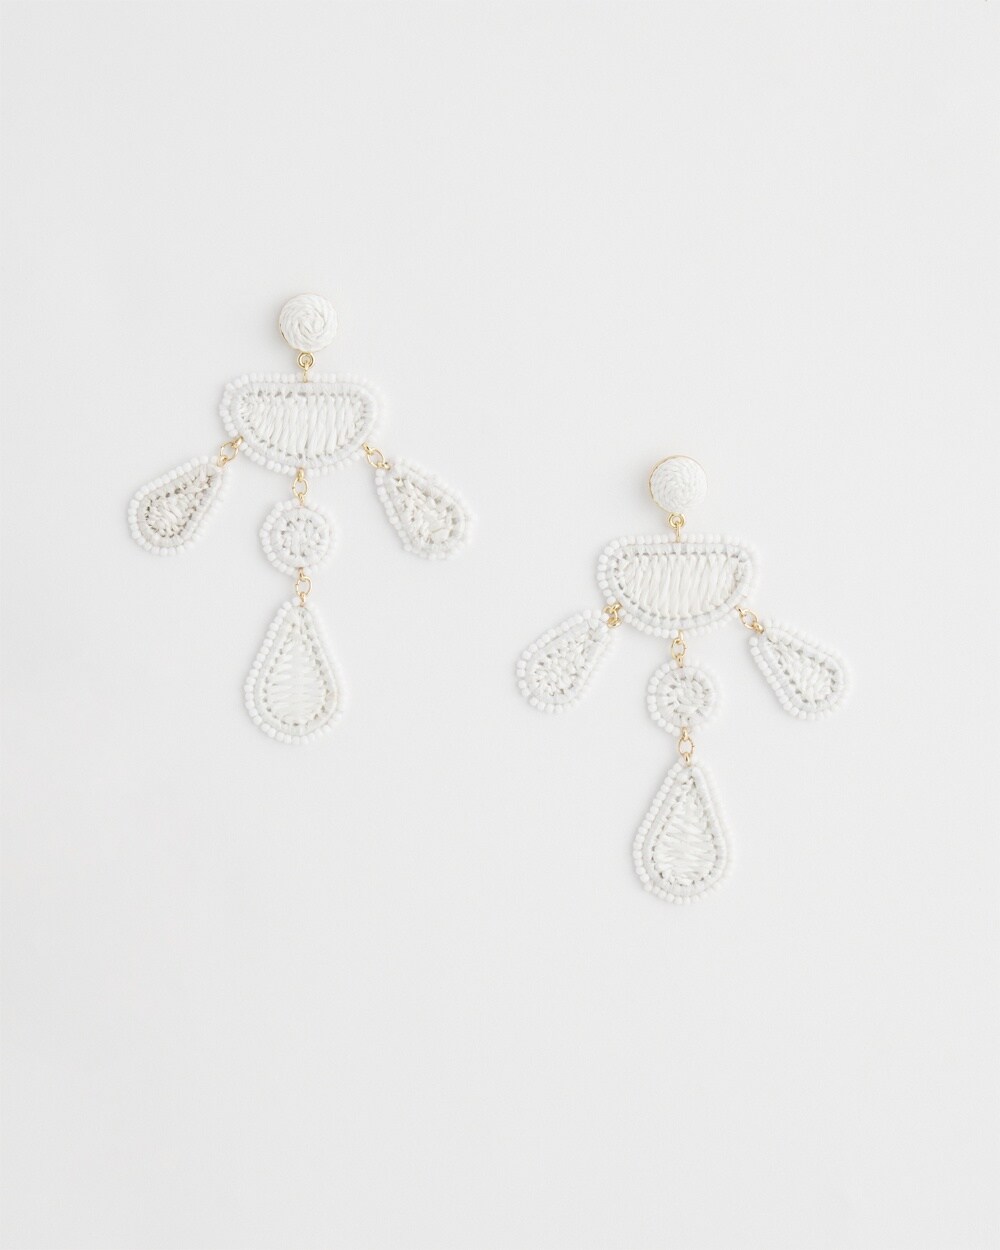 Shop Chico's No Droop White Crochet Earrings |  In Alabaster